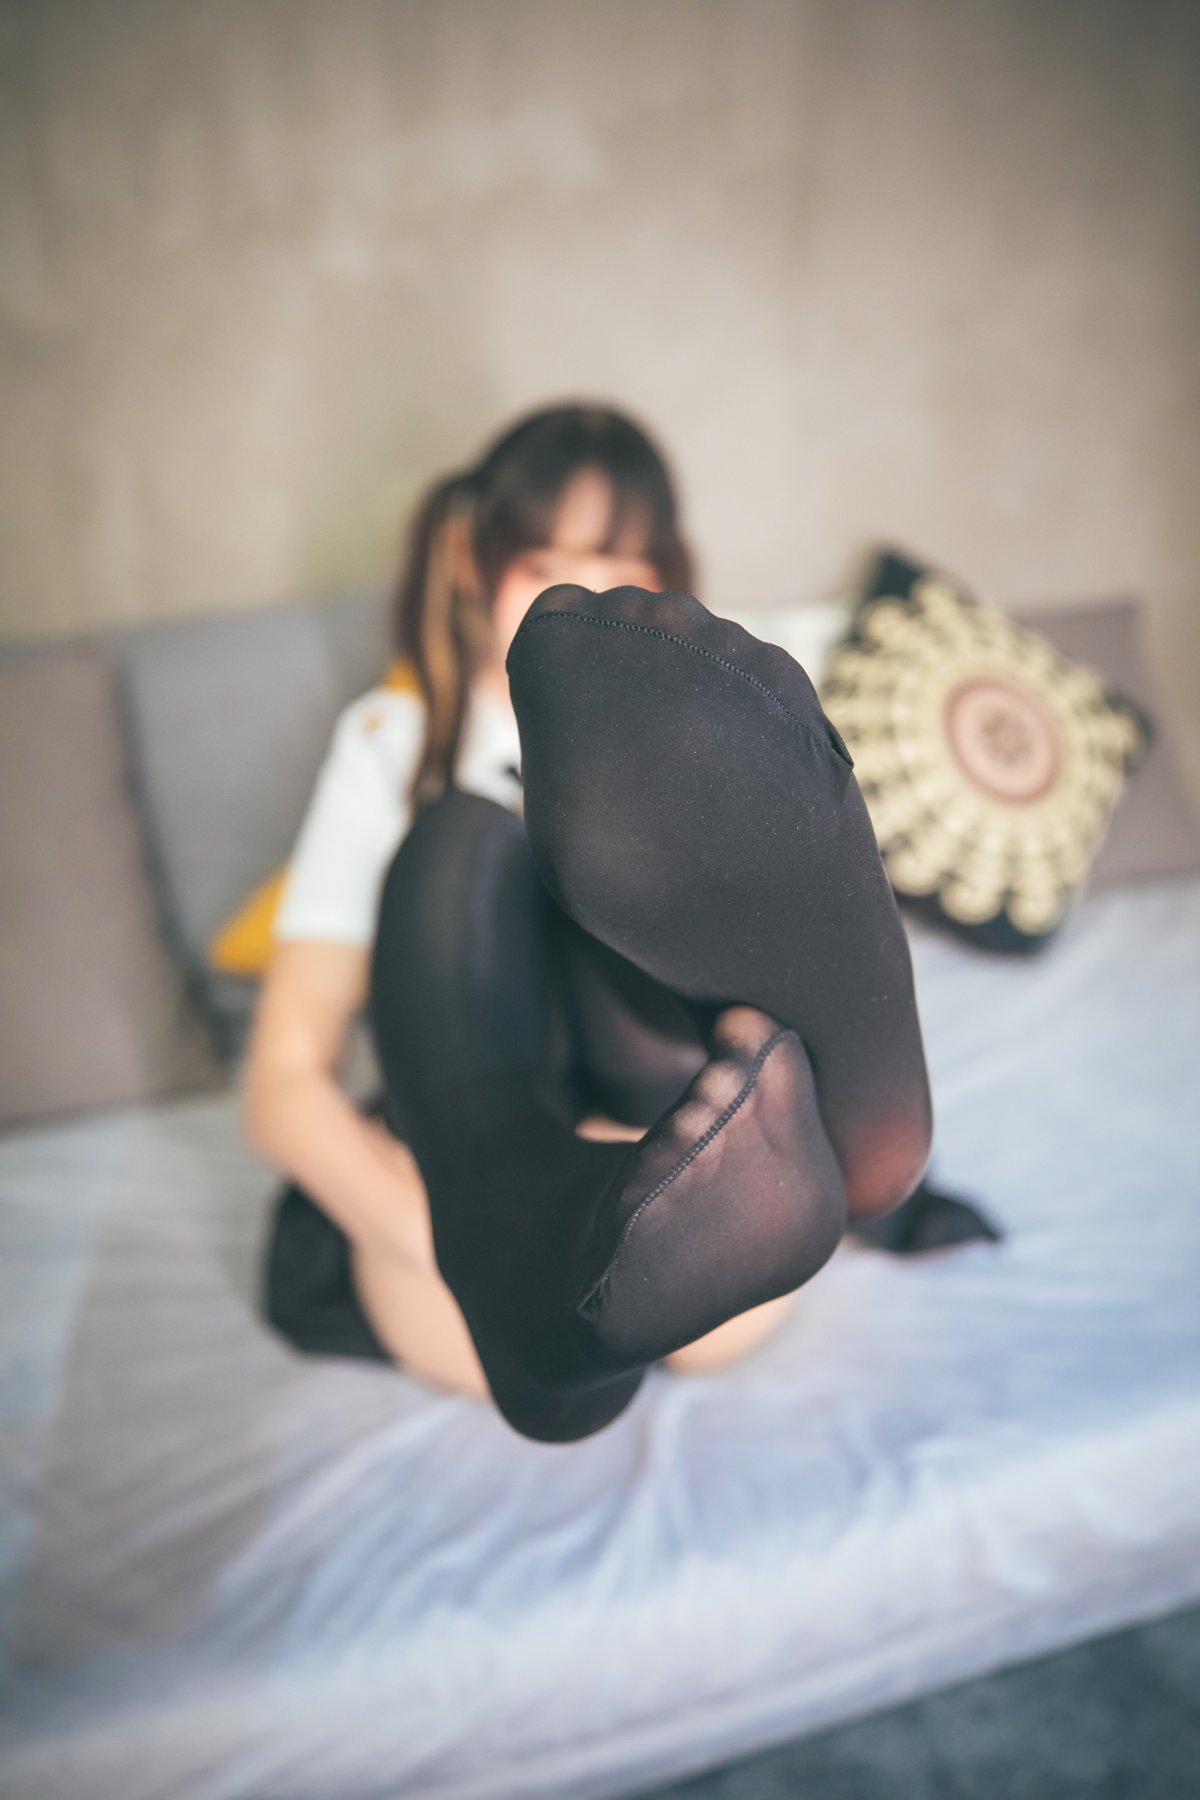 Coser@神楽坂真冬 Vol.069 お帰りなさい、指揮官 A 0064